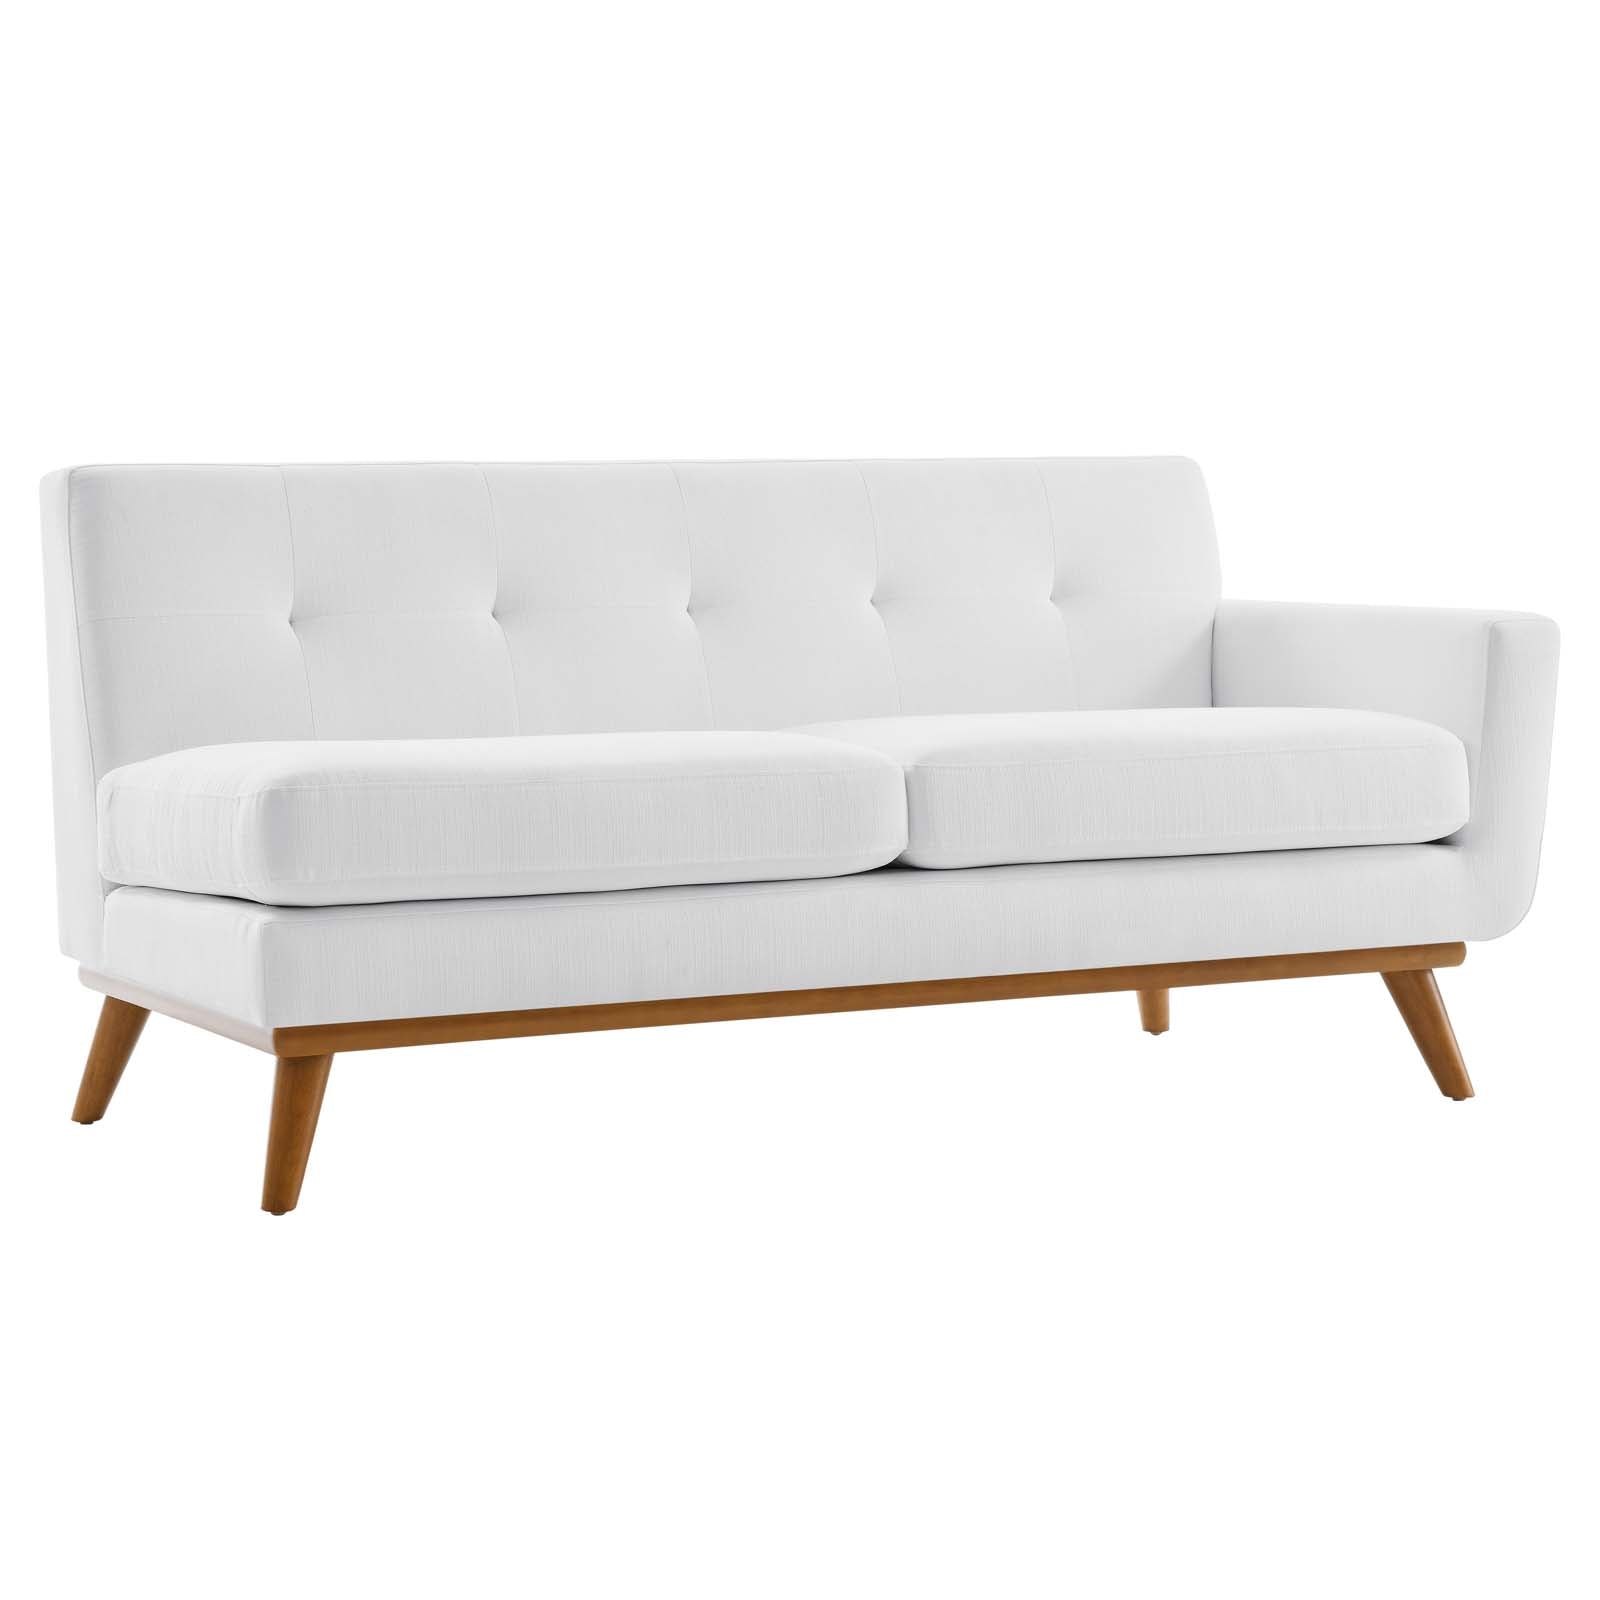 Modway Sectional Sofas - Engage Left-Facing Upholstered Fabric Sectional Sofa White